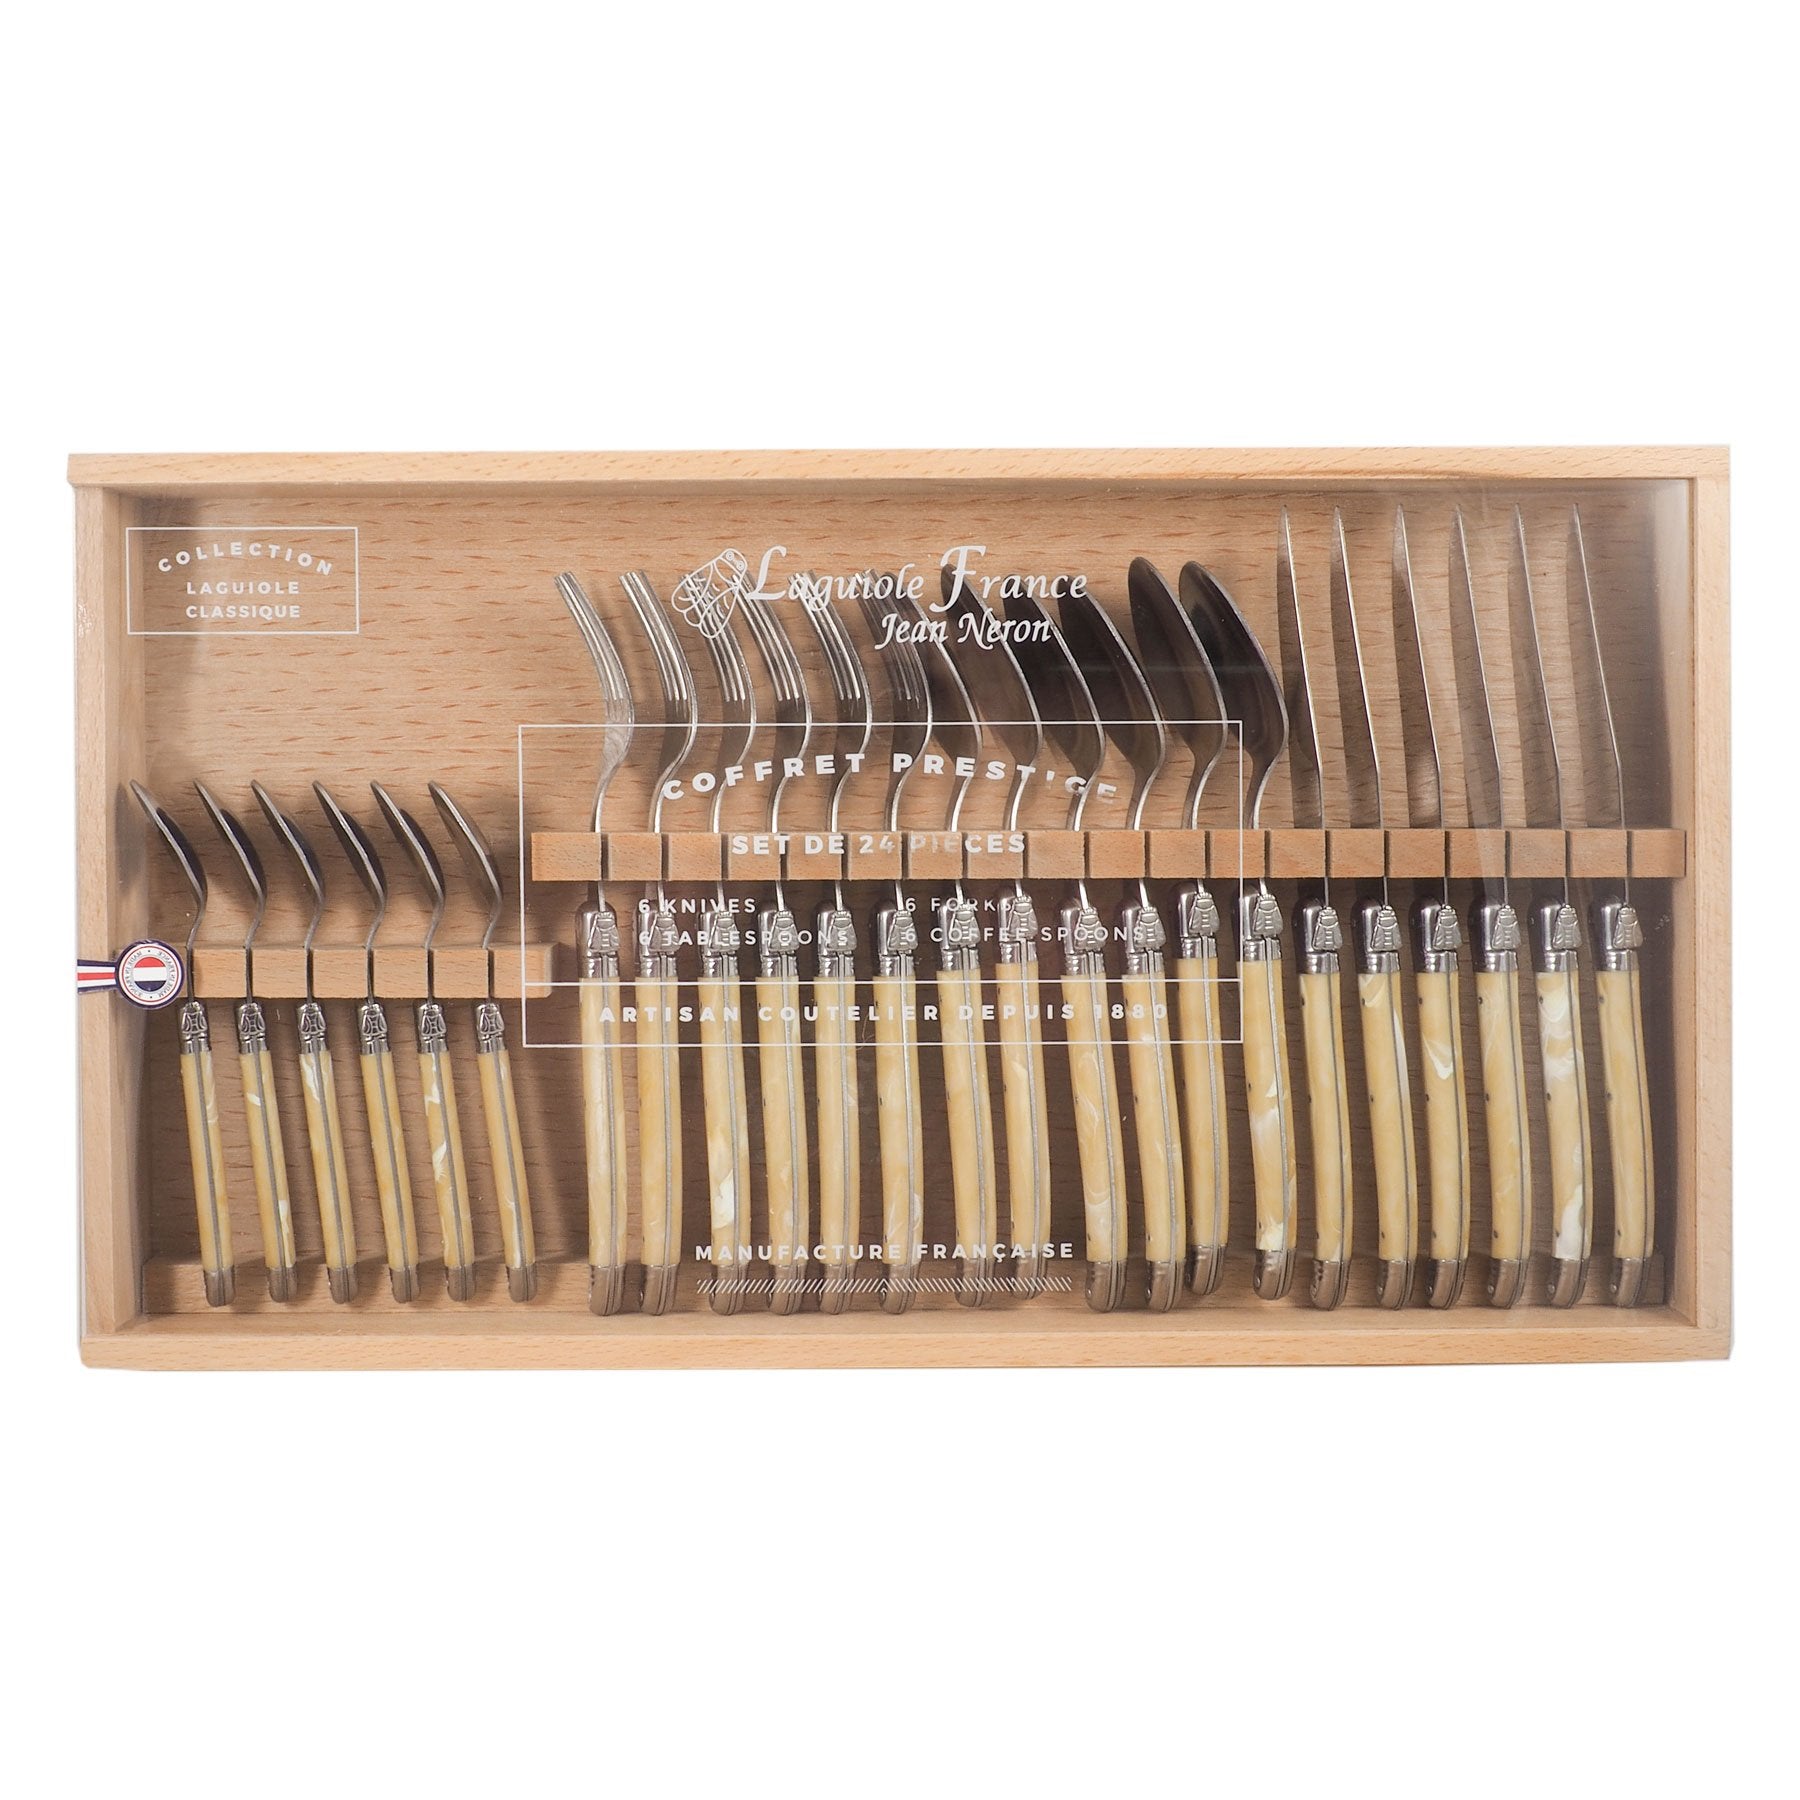 Lou Laguiole Authentic Cutlery Set 24 Pack grey with Wooden box